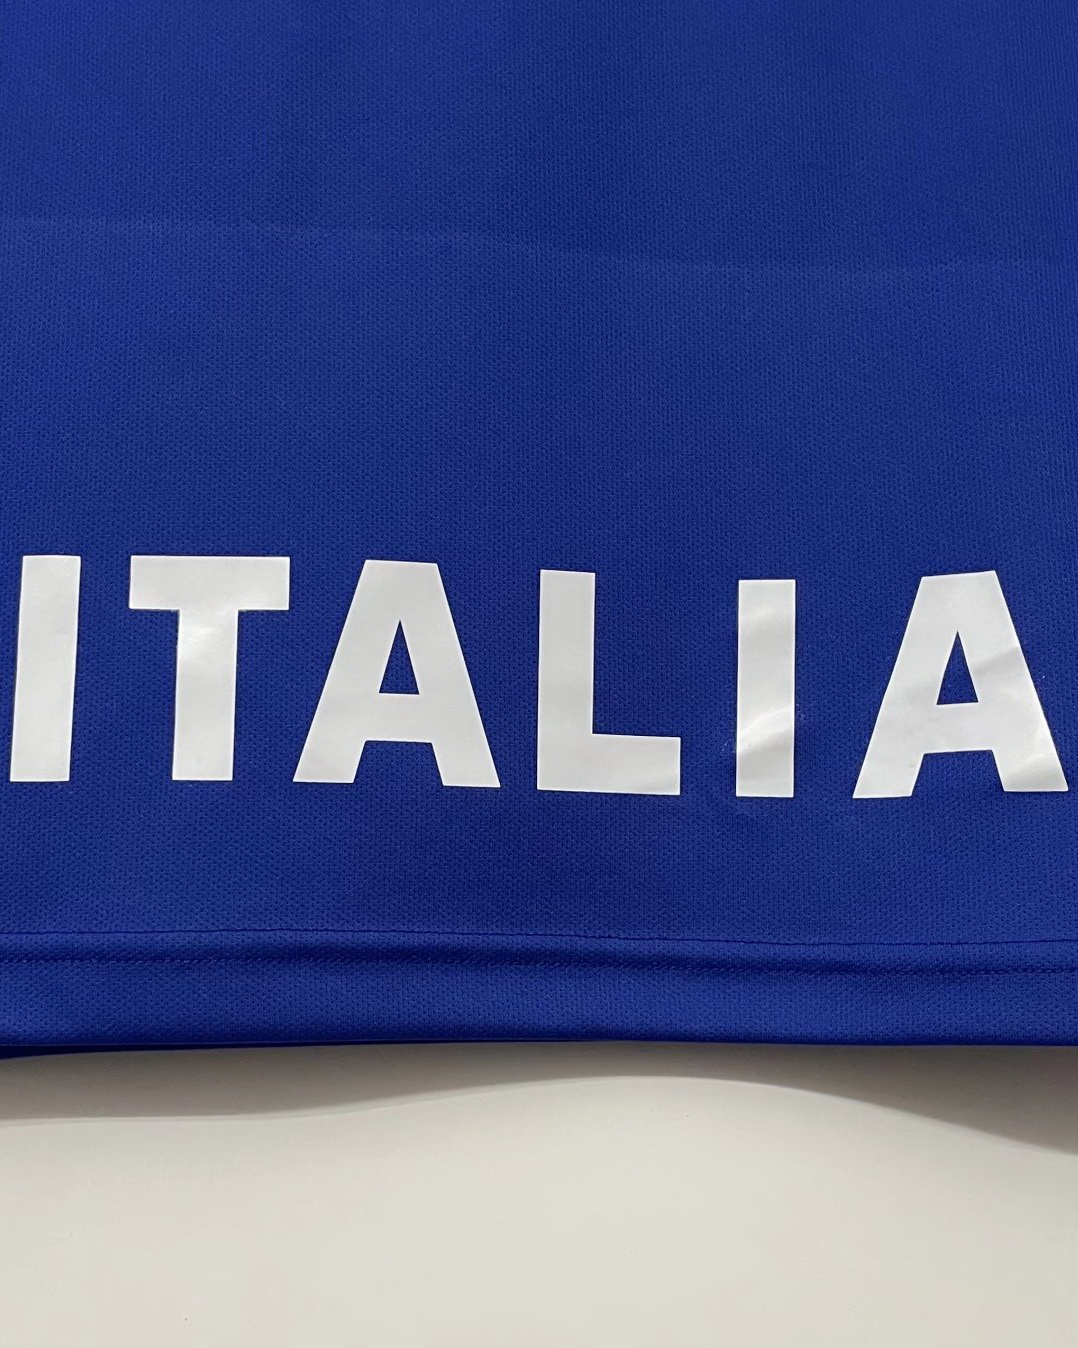 Italy 1996 Home Soccer Jersey